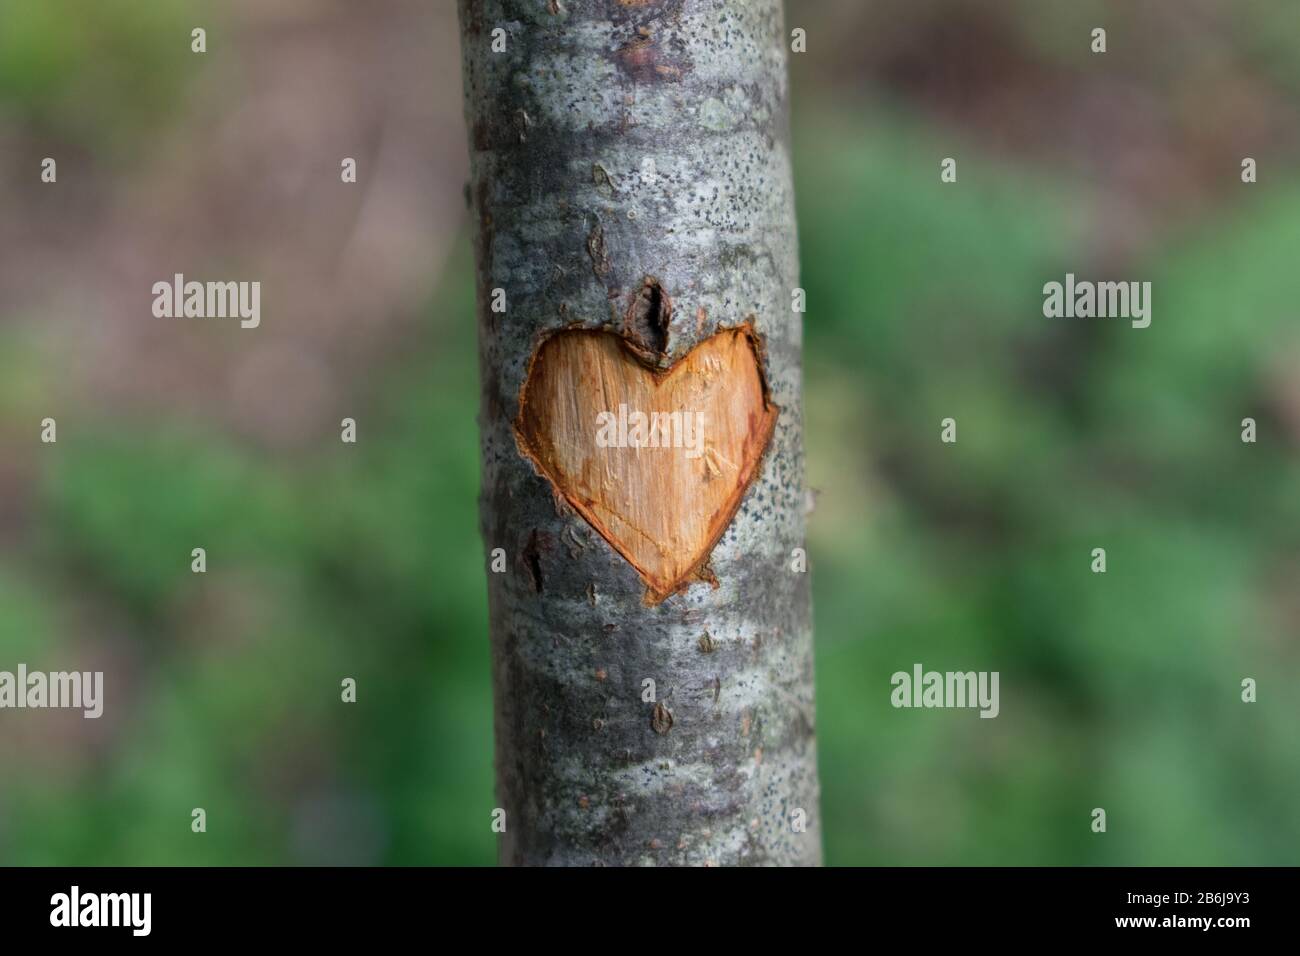 Symbol of heart carved in tree. Green, blurry forest background. Stock Photo